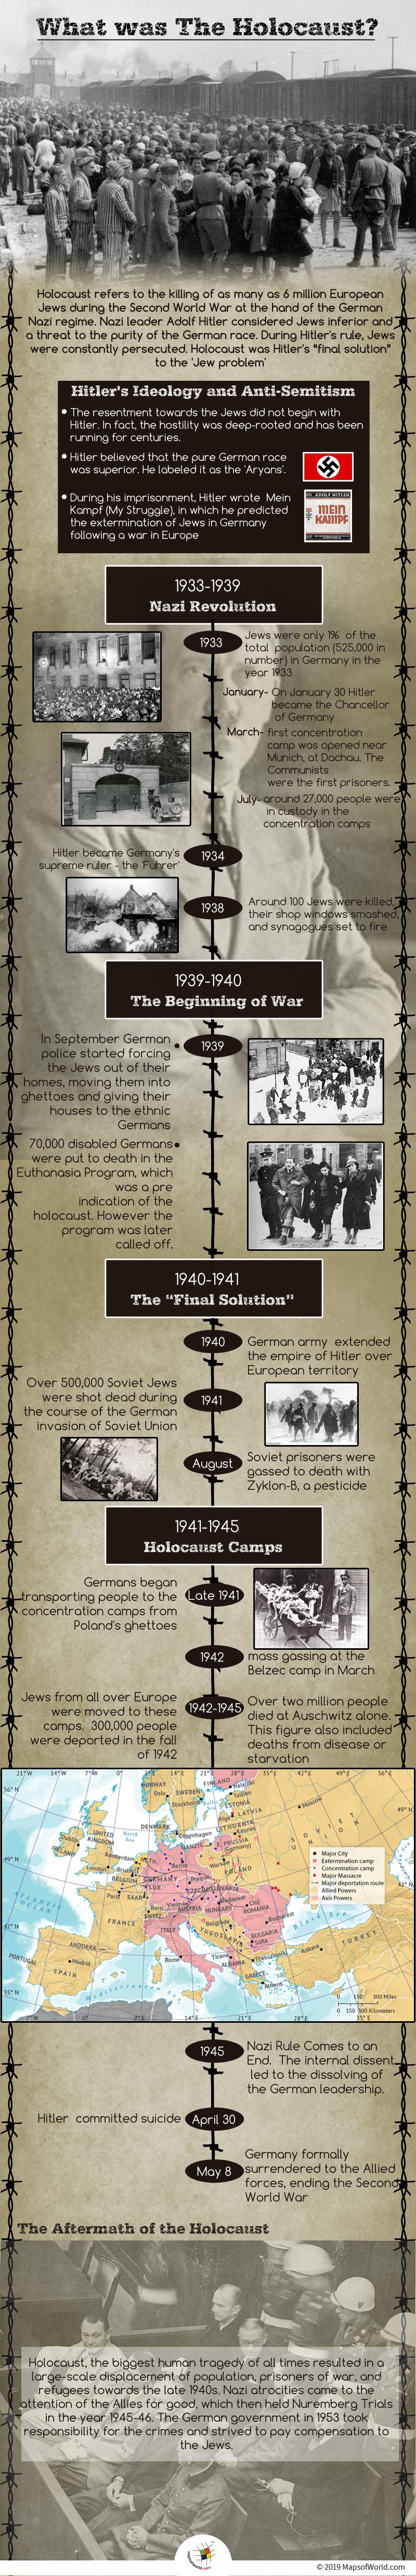 Infographic on The Holocaust